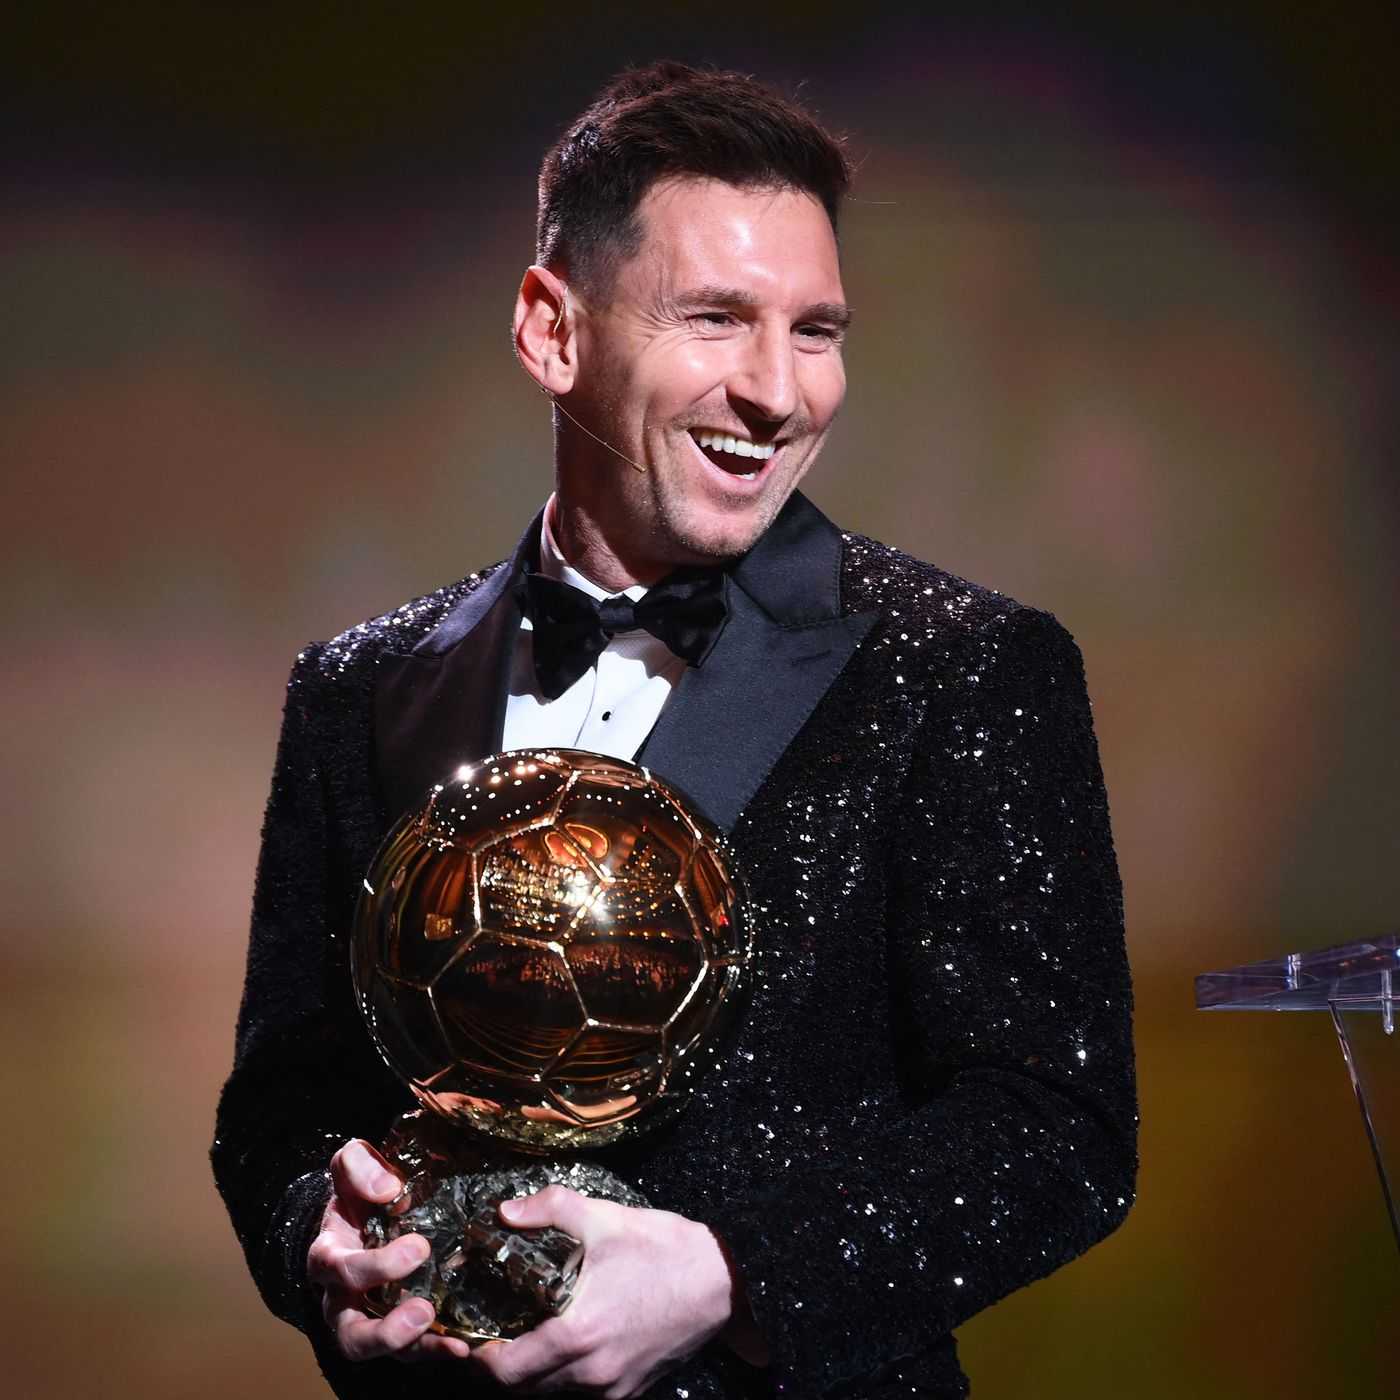 "CR7's Bitterness For Messi's Success Is Unbearable" - Reactions As Ronaldo Openly Criticizes Lionel Messi's Seventh Ballon d'Or